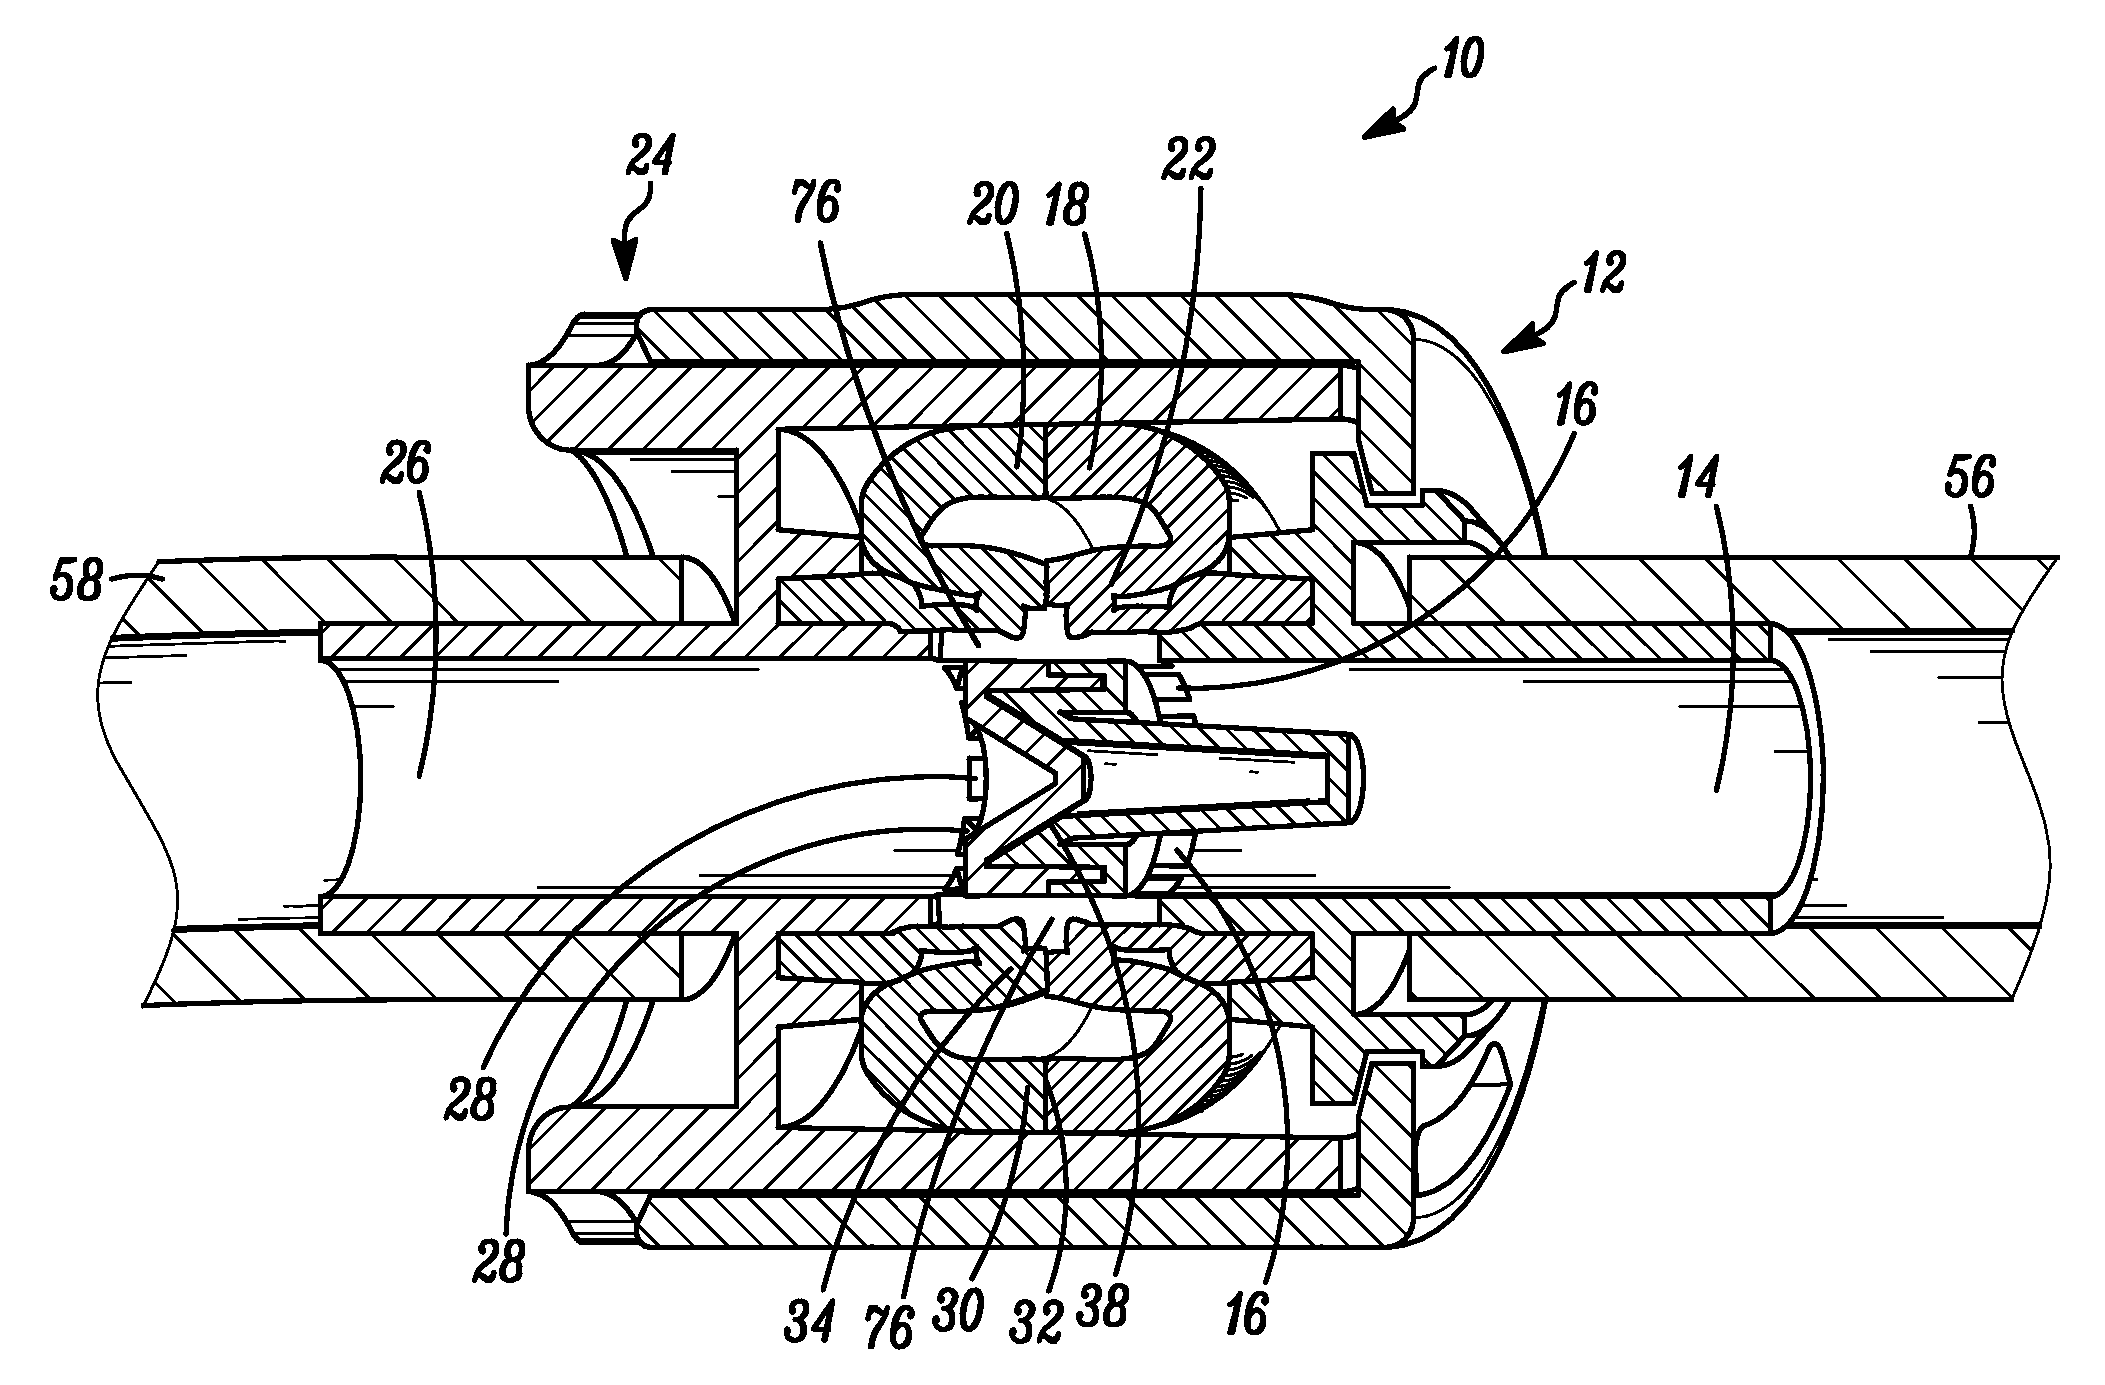 Aseptic connector with deflectable ring of concern and method